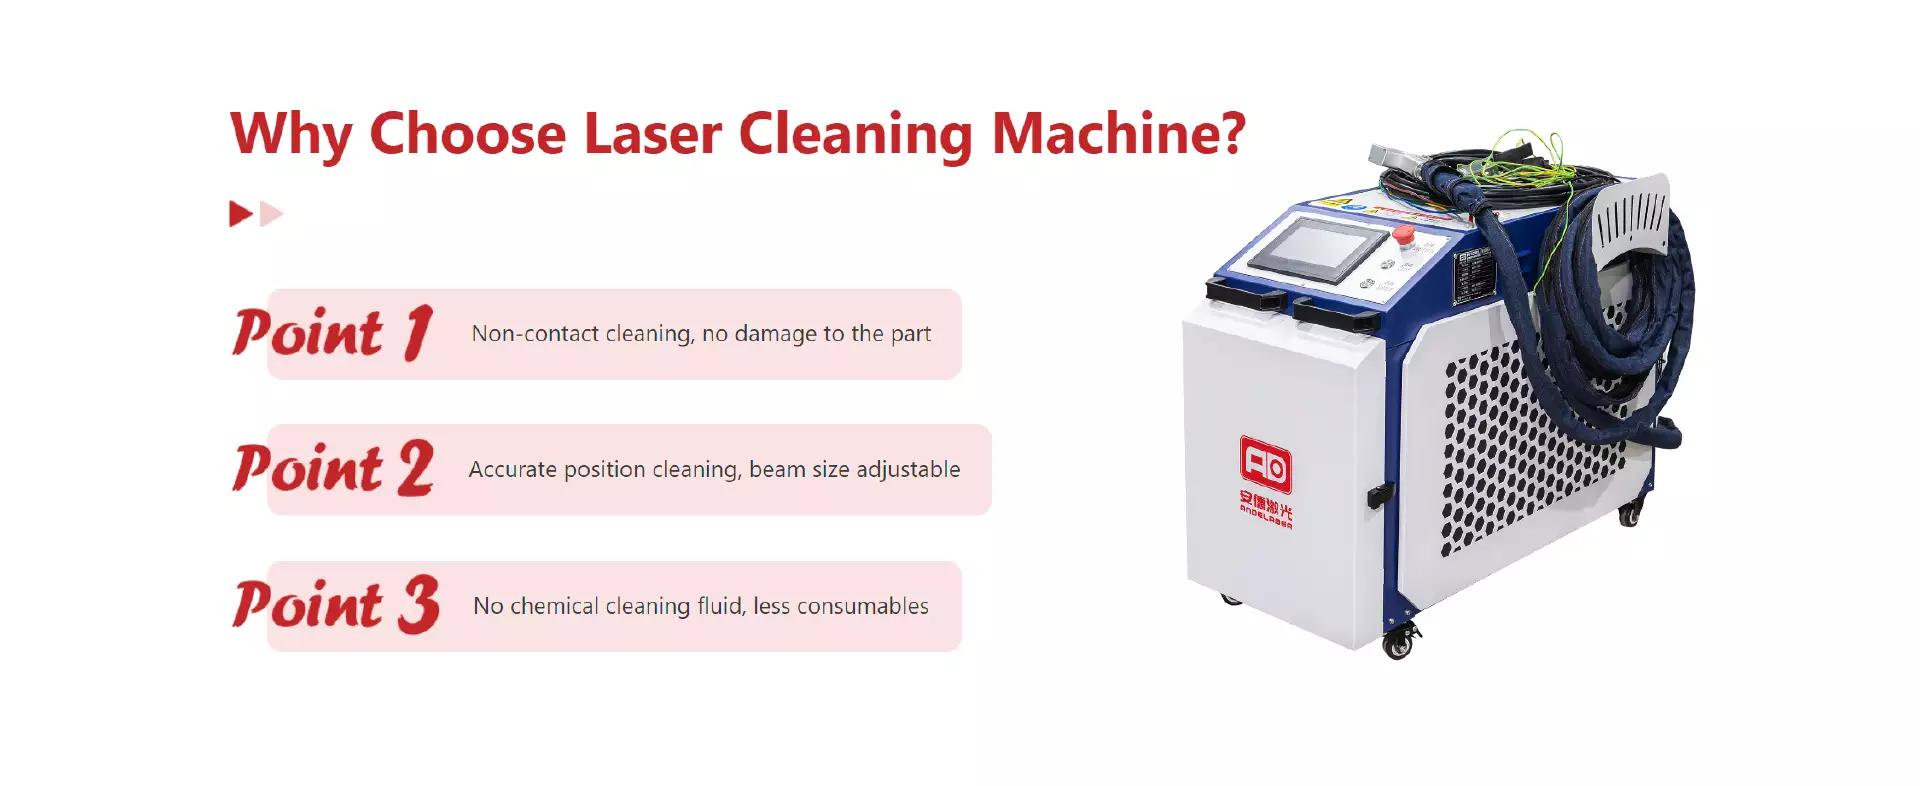 Laser cleaning machine offers non-contact cleaning for both organic and inorganic substances, such as rust, paint, and oil. Ideal for rust removal, relic restoration, and coating elimination.